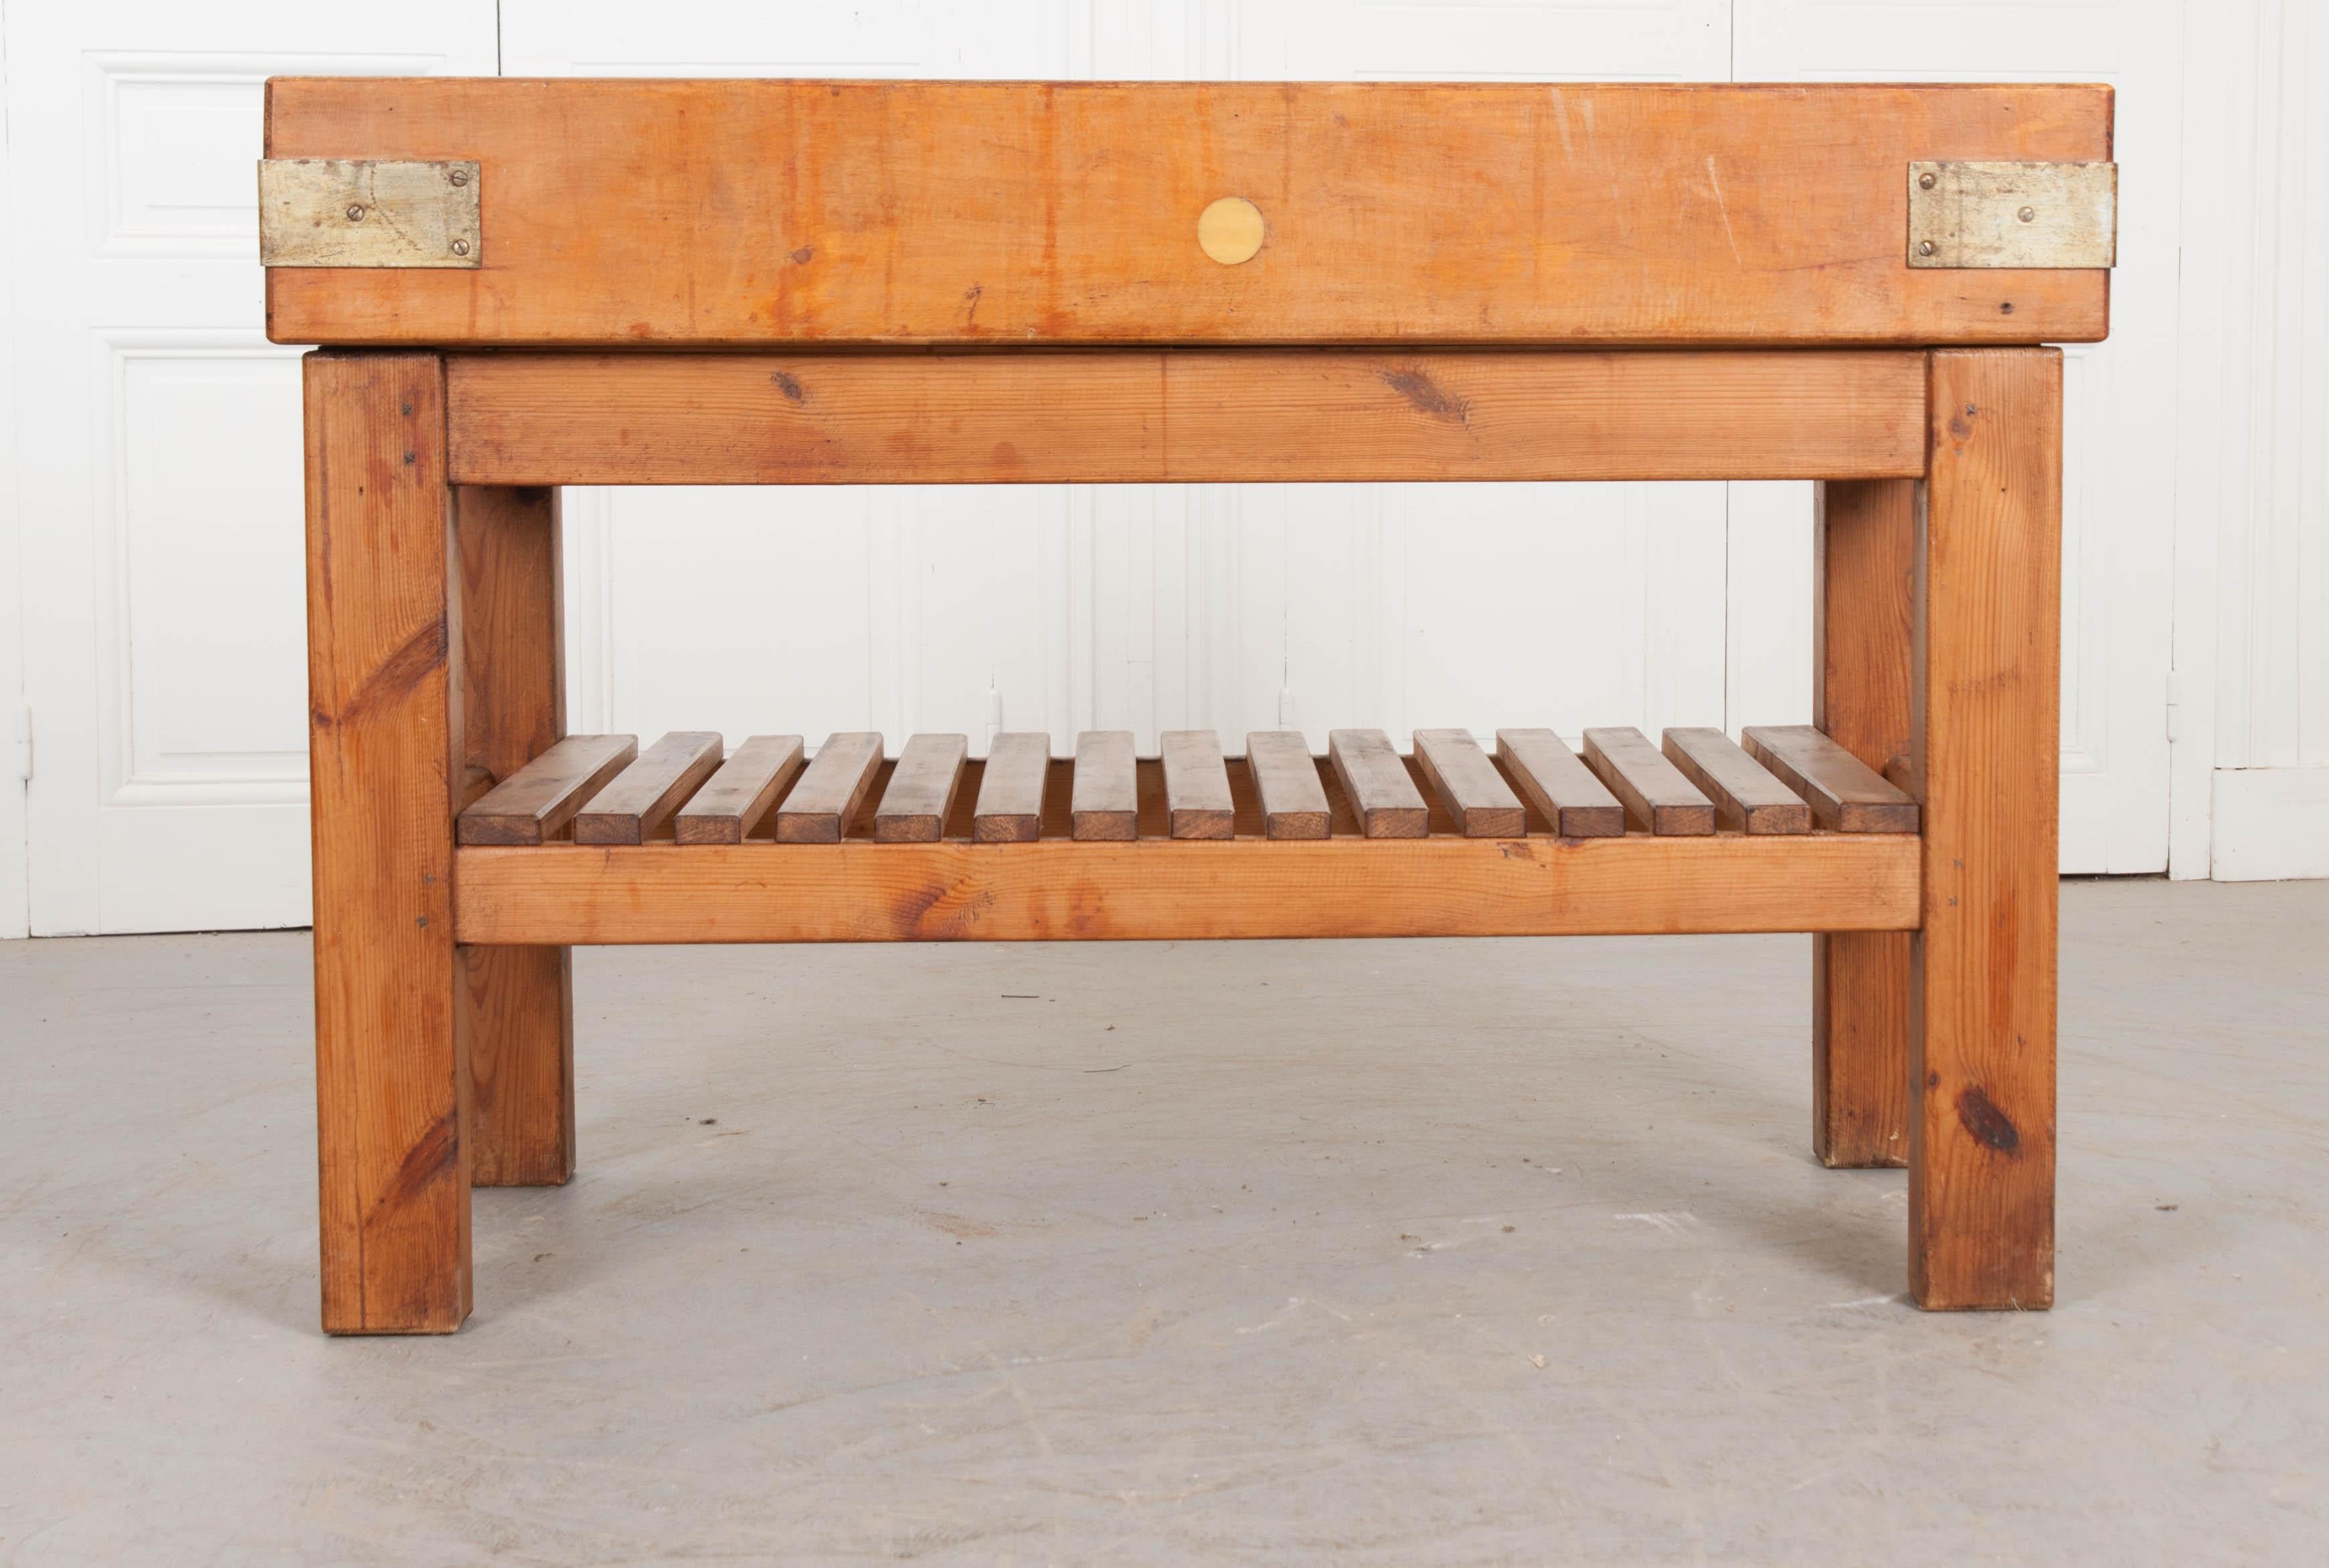 A substantial pine butcher block, from 20th century, France. The table’s top is made from thick pine blocks that have been tightly joined together and bound with steel bindings. The work surface has acquired some patination from years of knife and